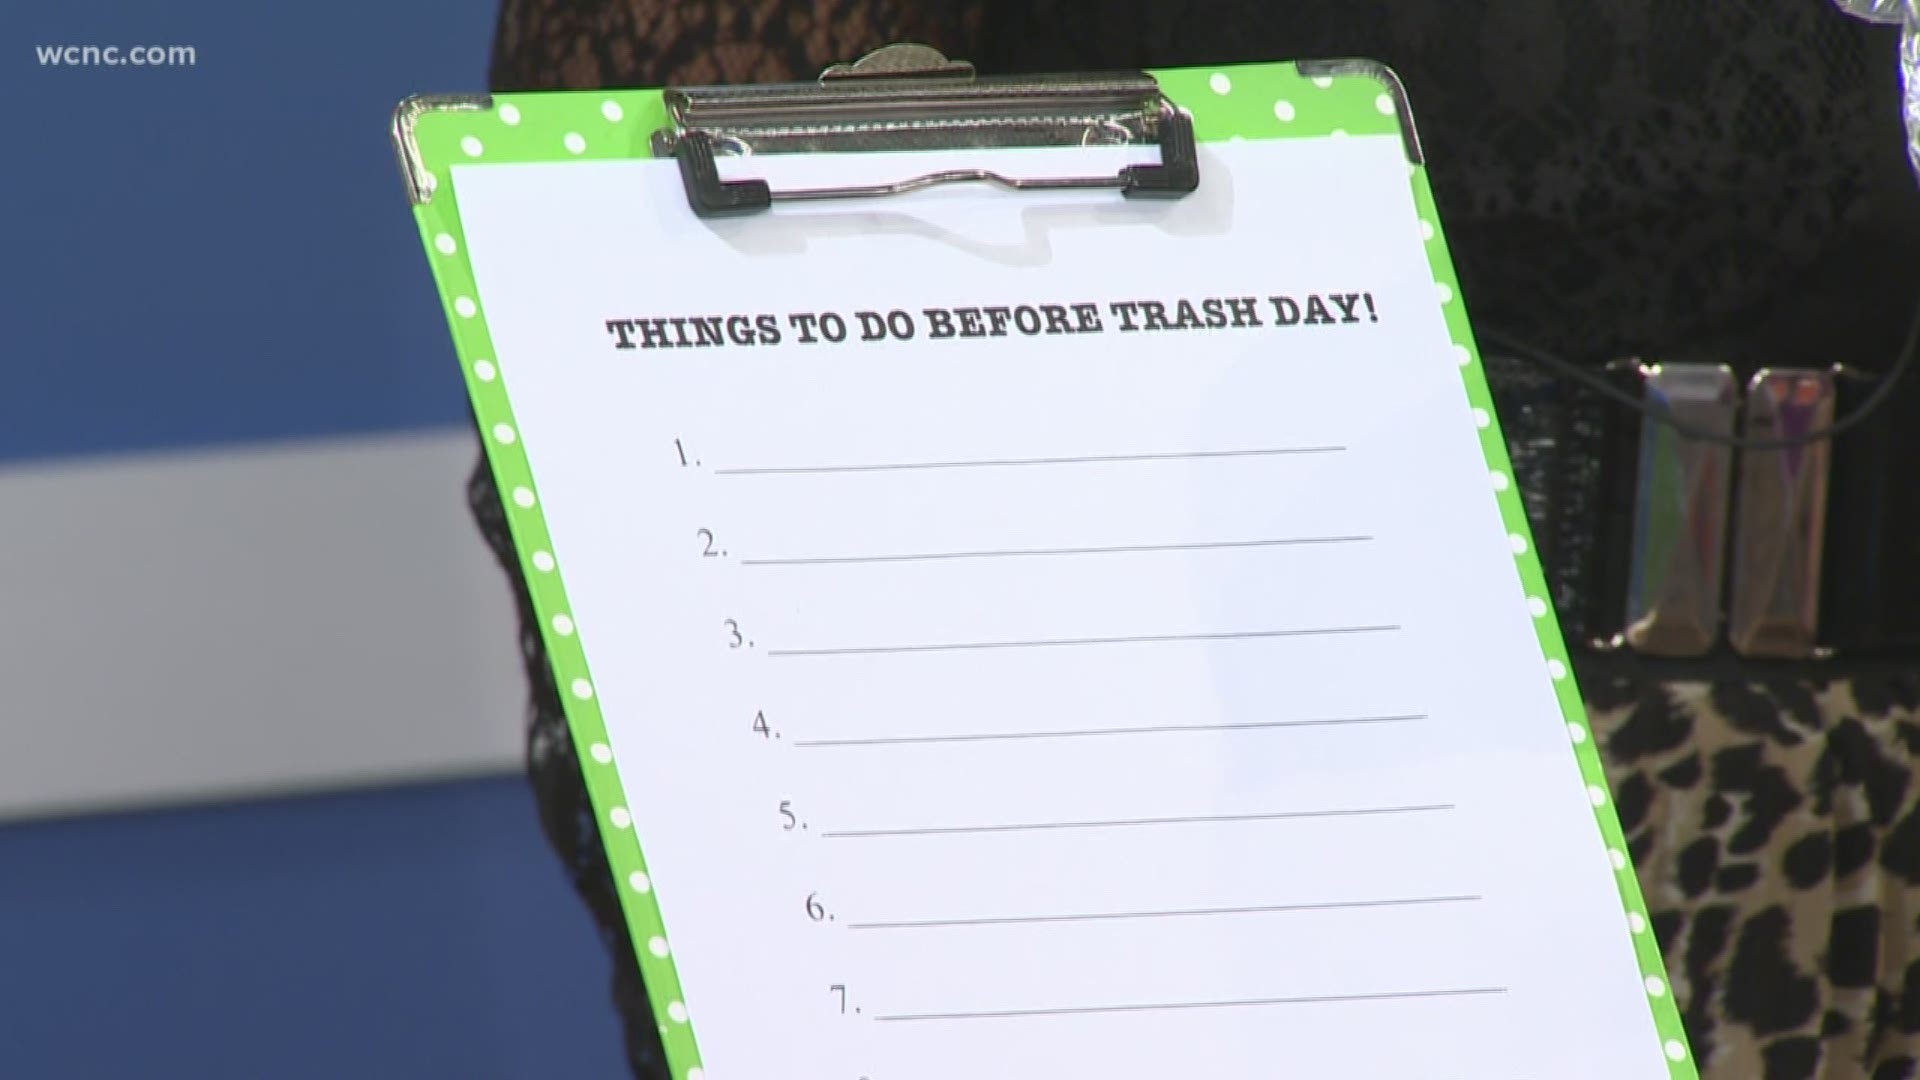 Professional organizer Laurie Martin shares things your family can do before trash day to keep your home clutter free.